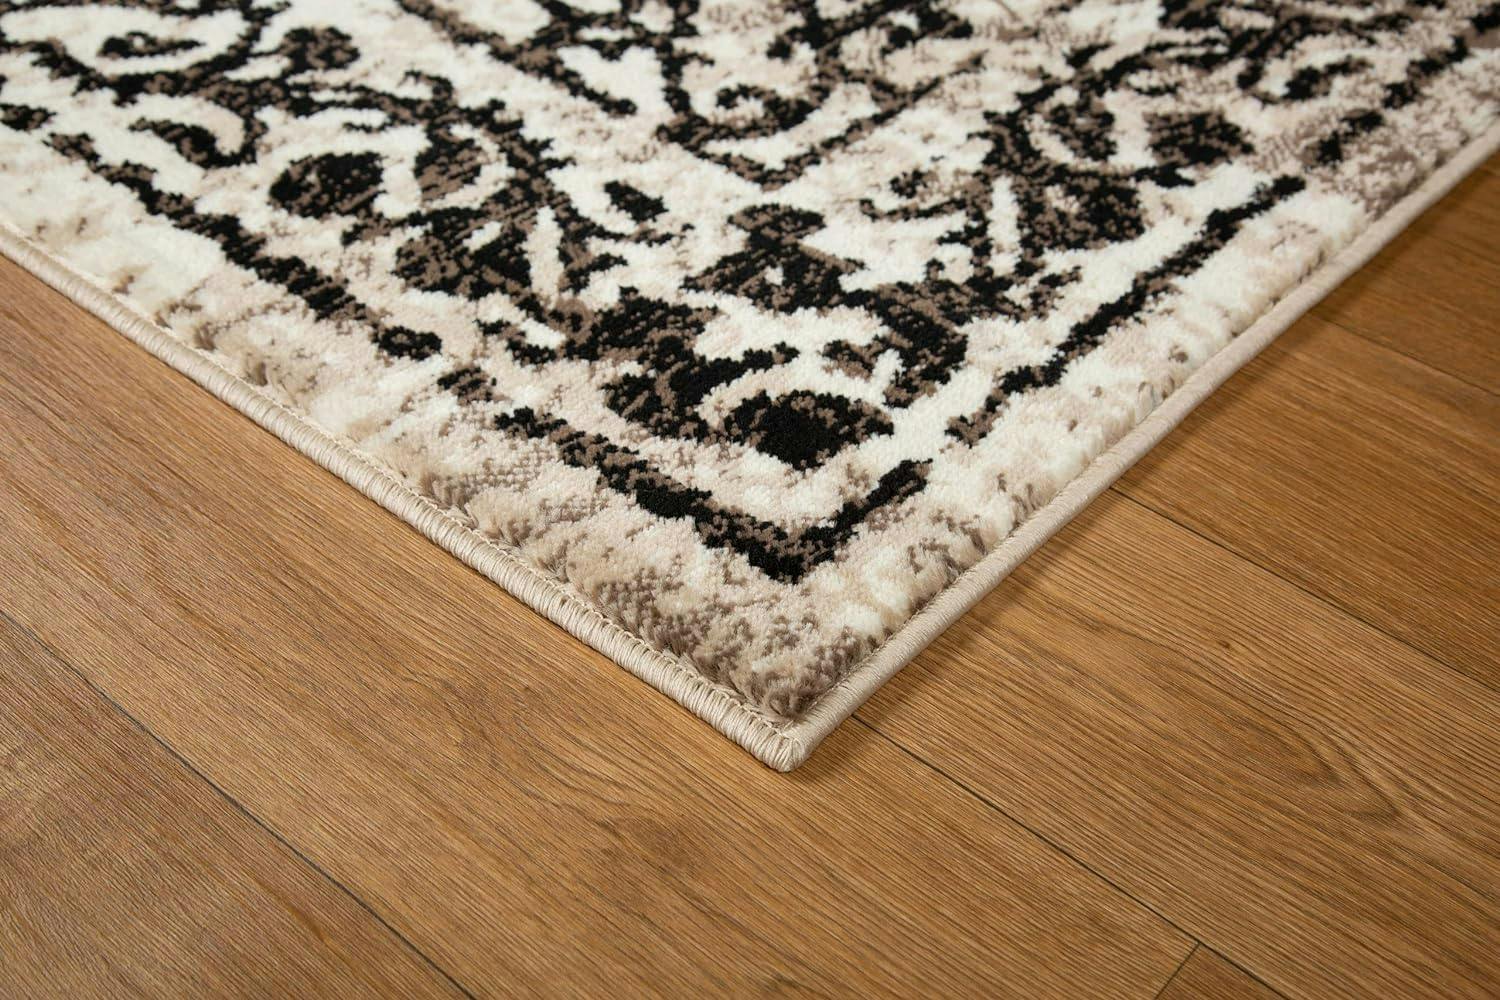 Reversible Black Synthetic 5' x 7' Easy-Care Area Rug